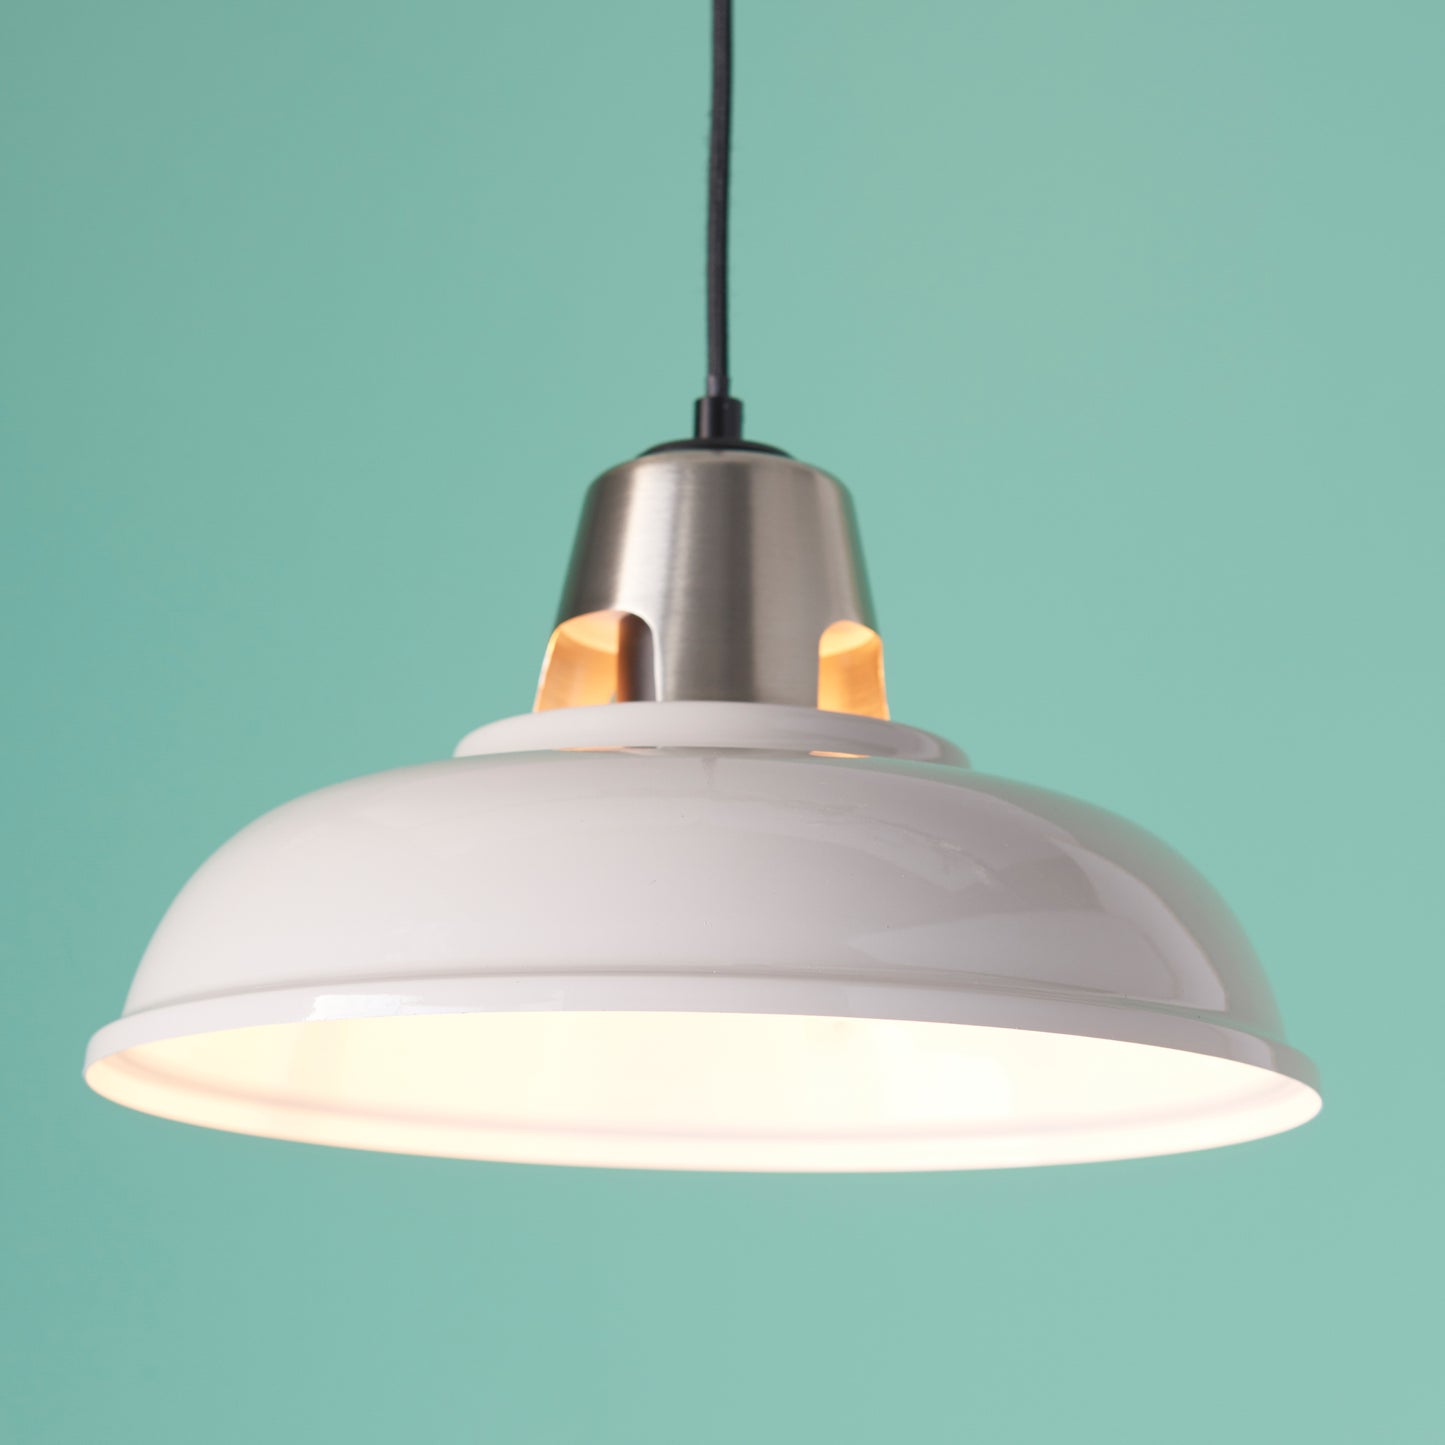 Load image into Gallery viewer, A white Staverton Shade Taupe pendant light hanging on a turquoise background, adding elegance to your interior decor.
